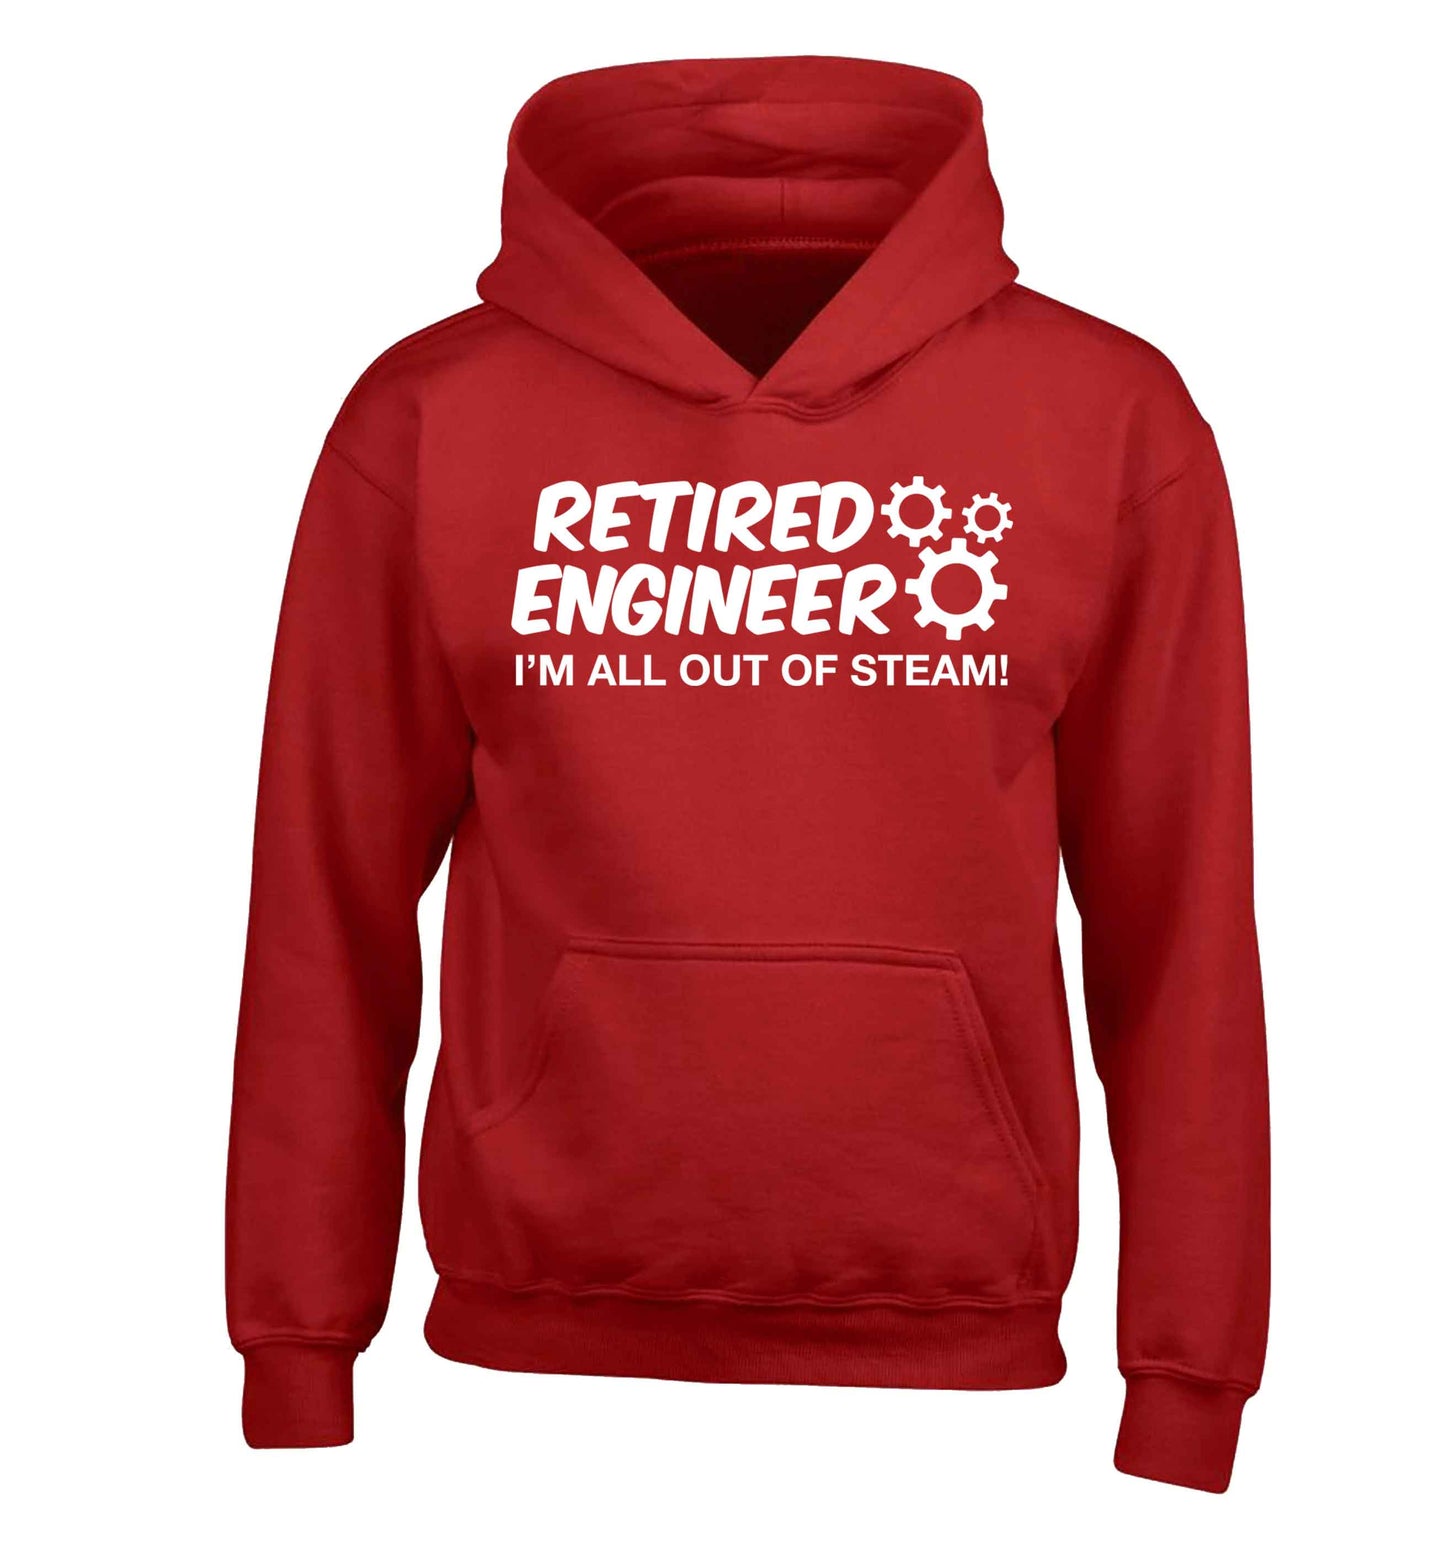 Retired engineer I'm all out of steam children's red hoodie 12-13 Years